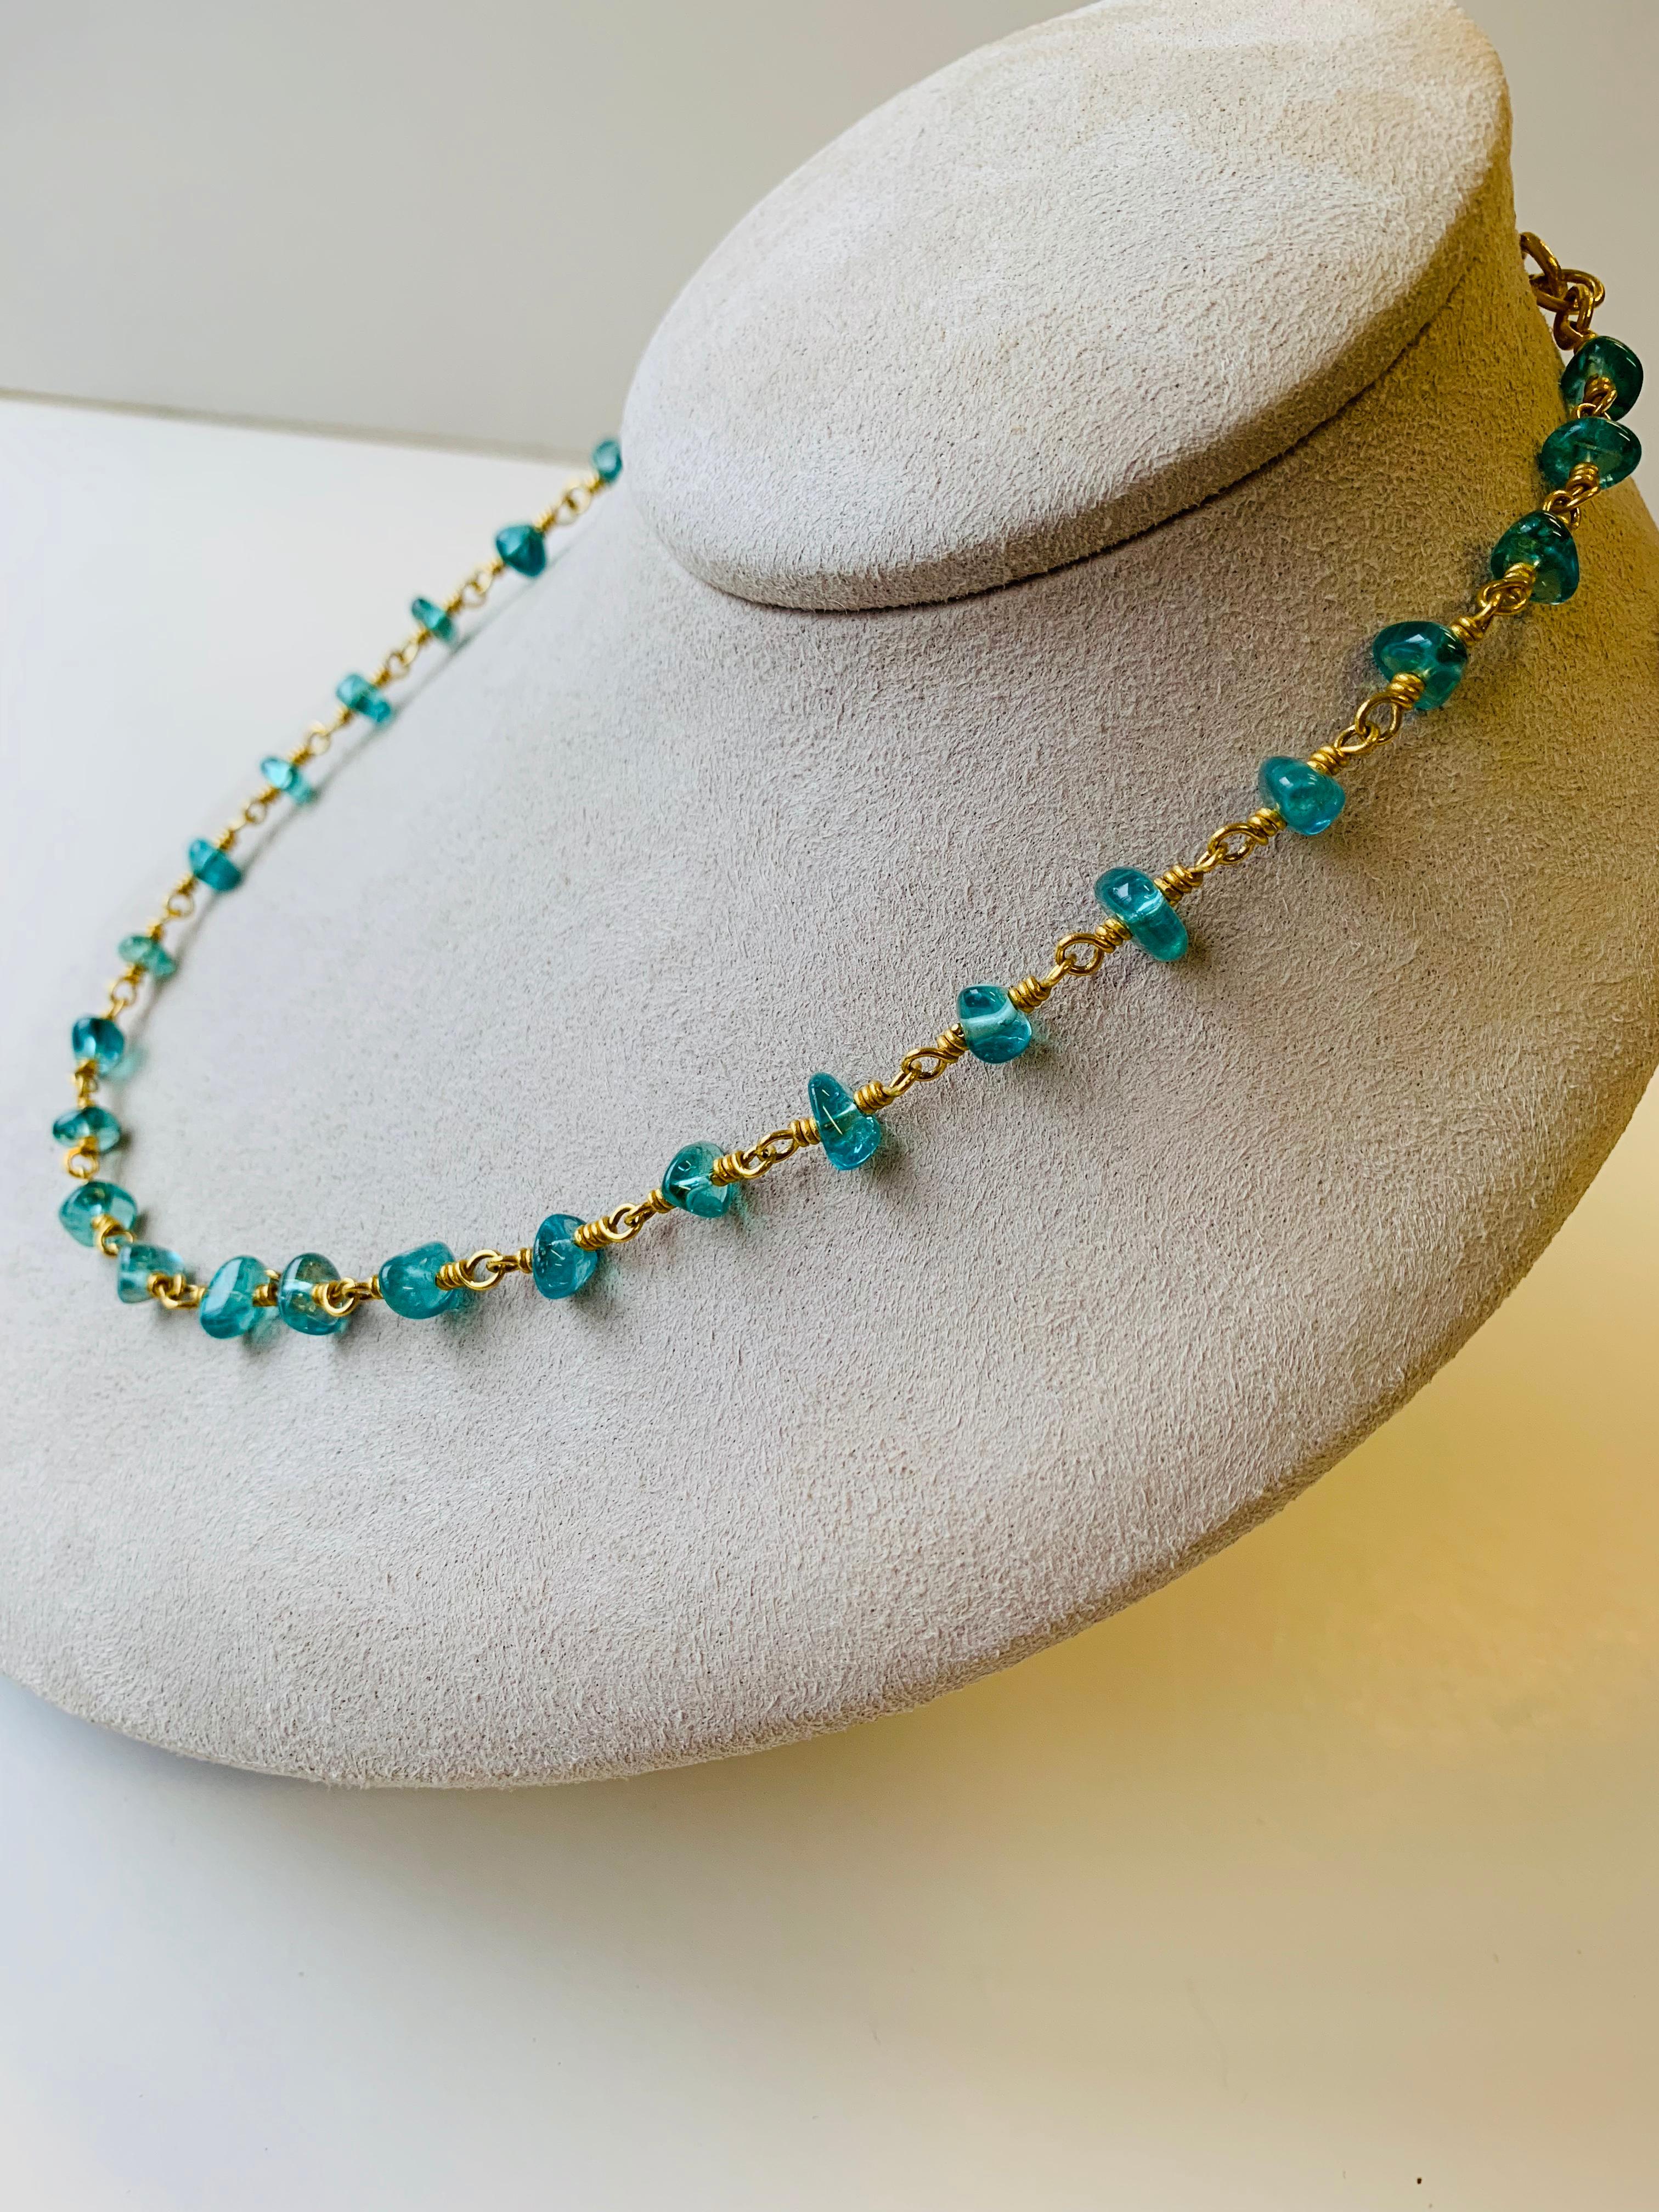 Necklace of luminous tumbled Apatite nuggets on 22 karat gold hand woven chain 18 inches long.
Hand made in NY